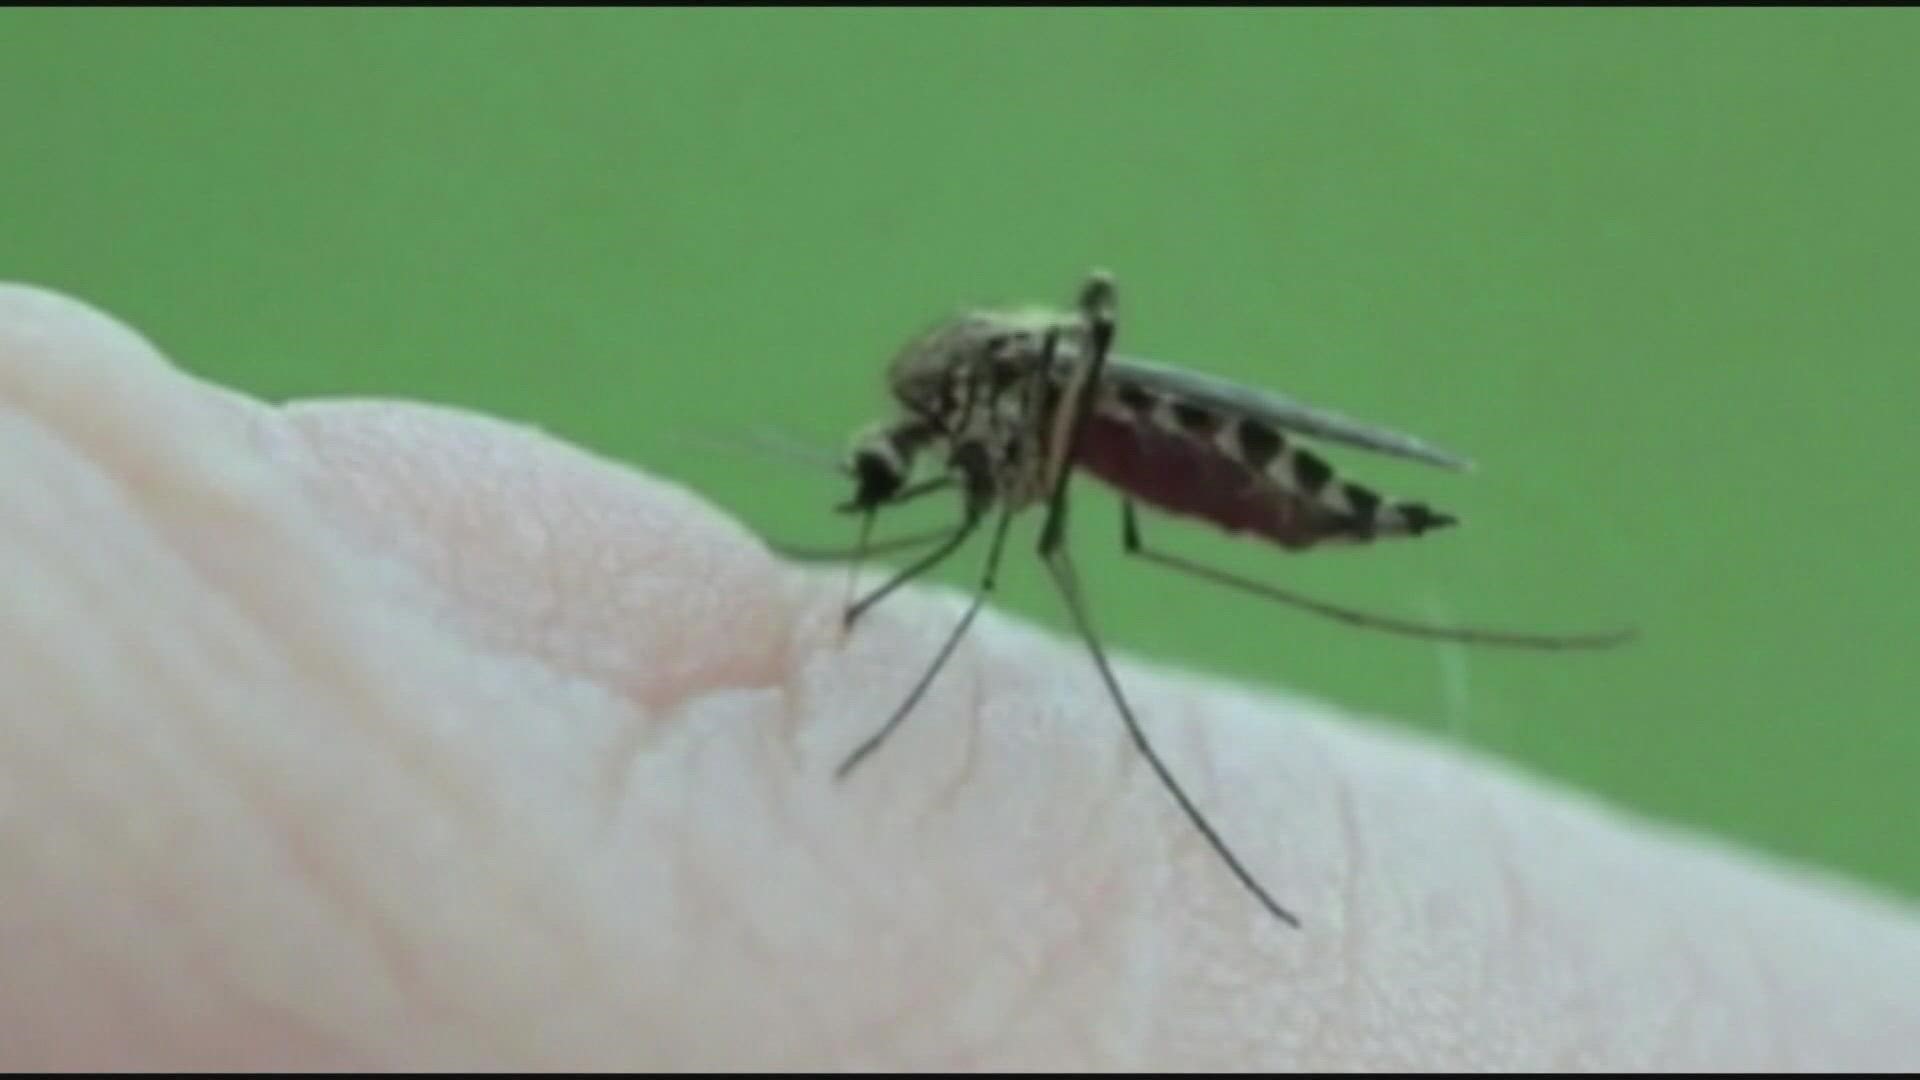 The cooler weather on the way should knock out many of the mosquitoes, according to the health department.